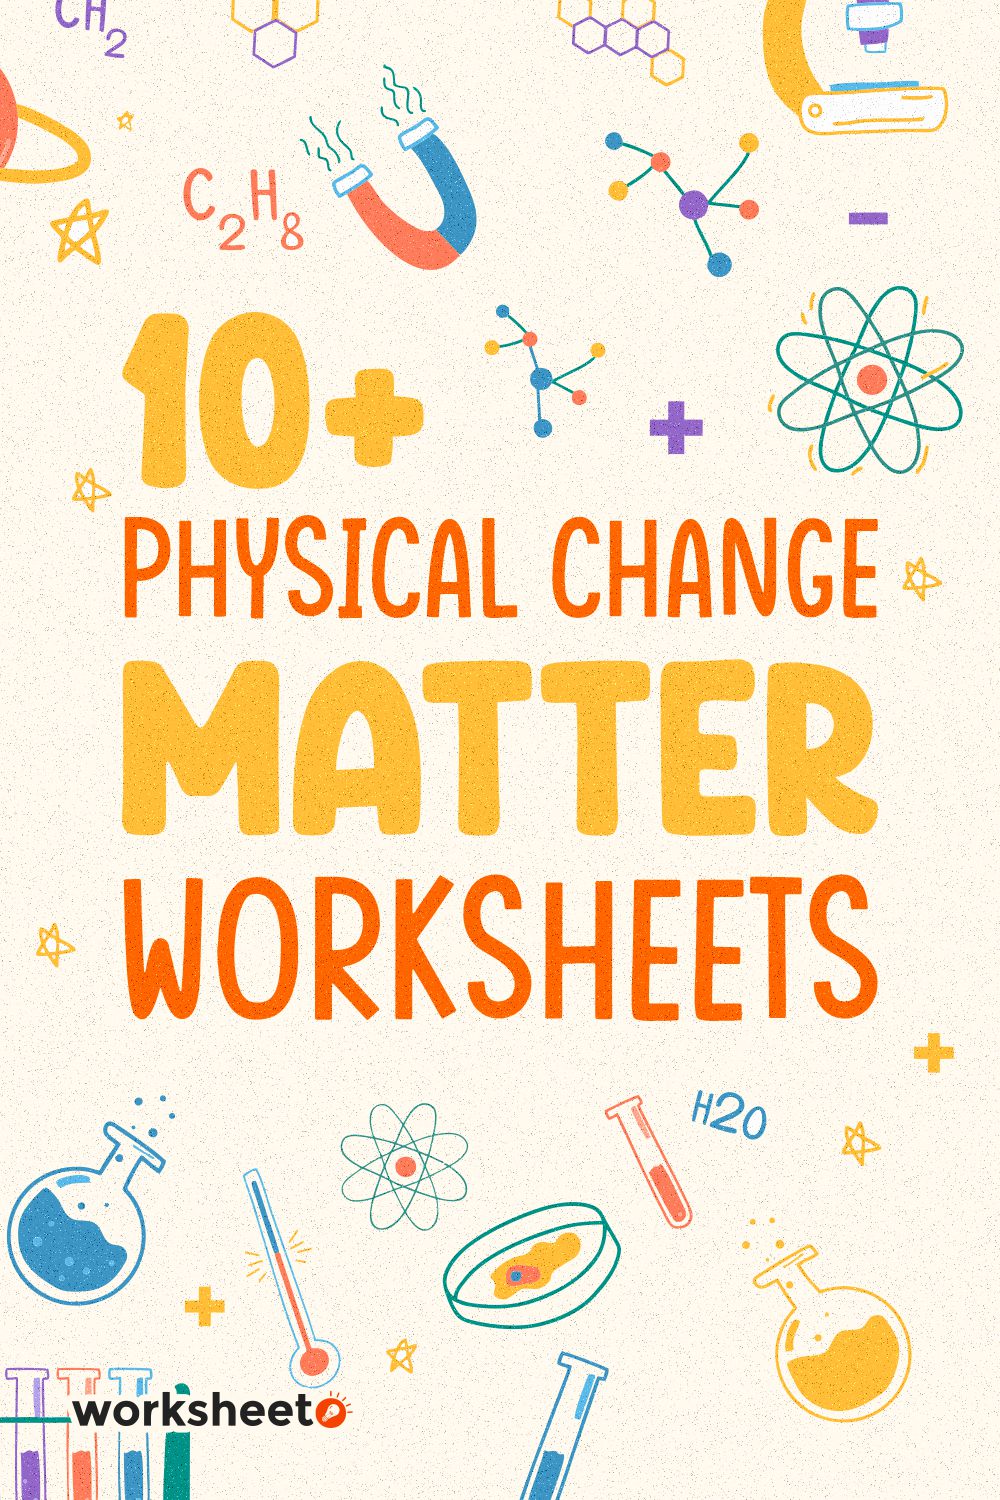 16 Images of Physical Changes Matter Worksheets